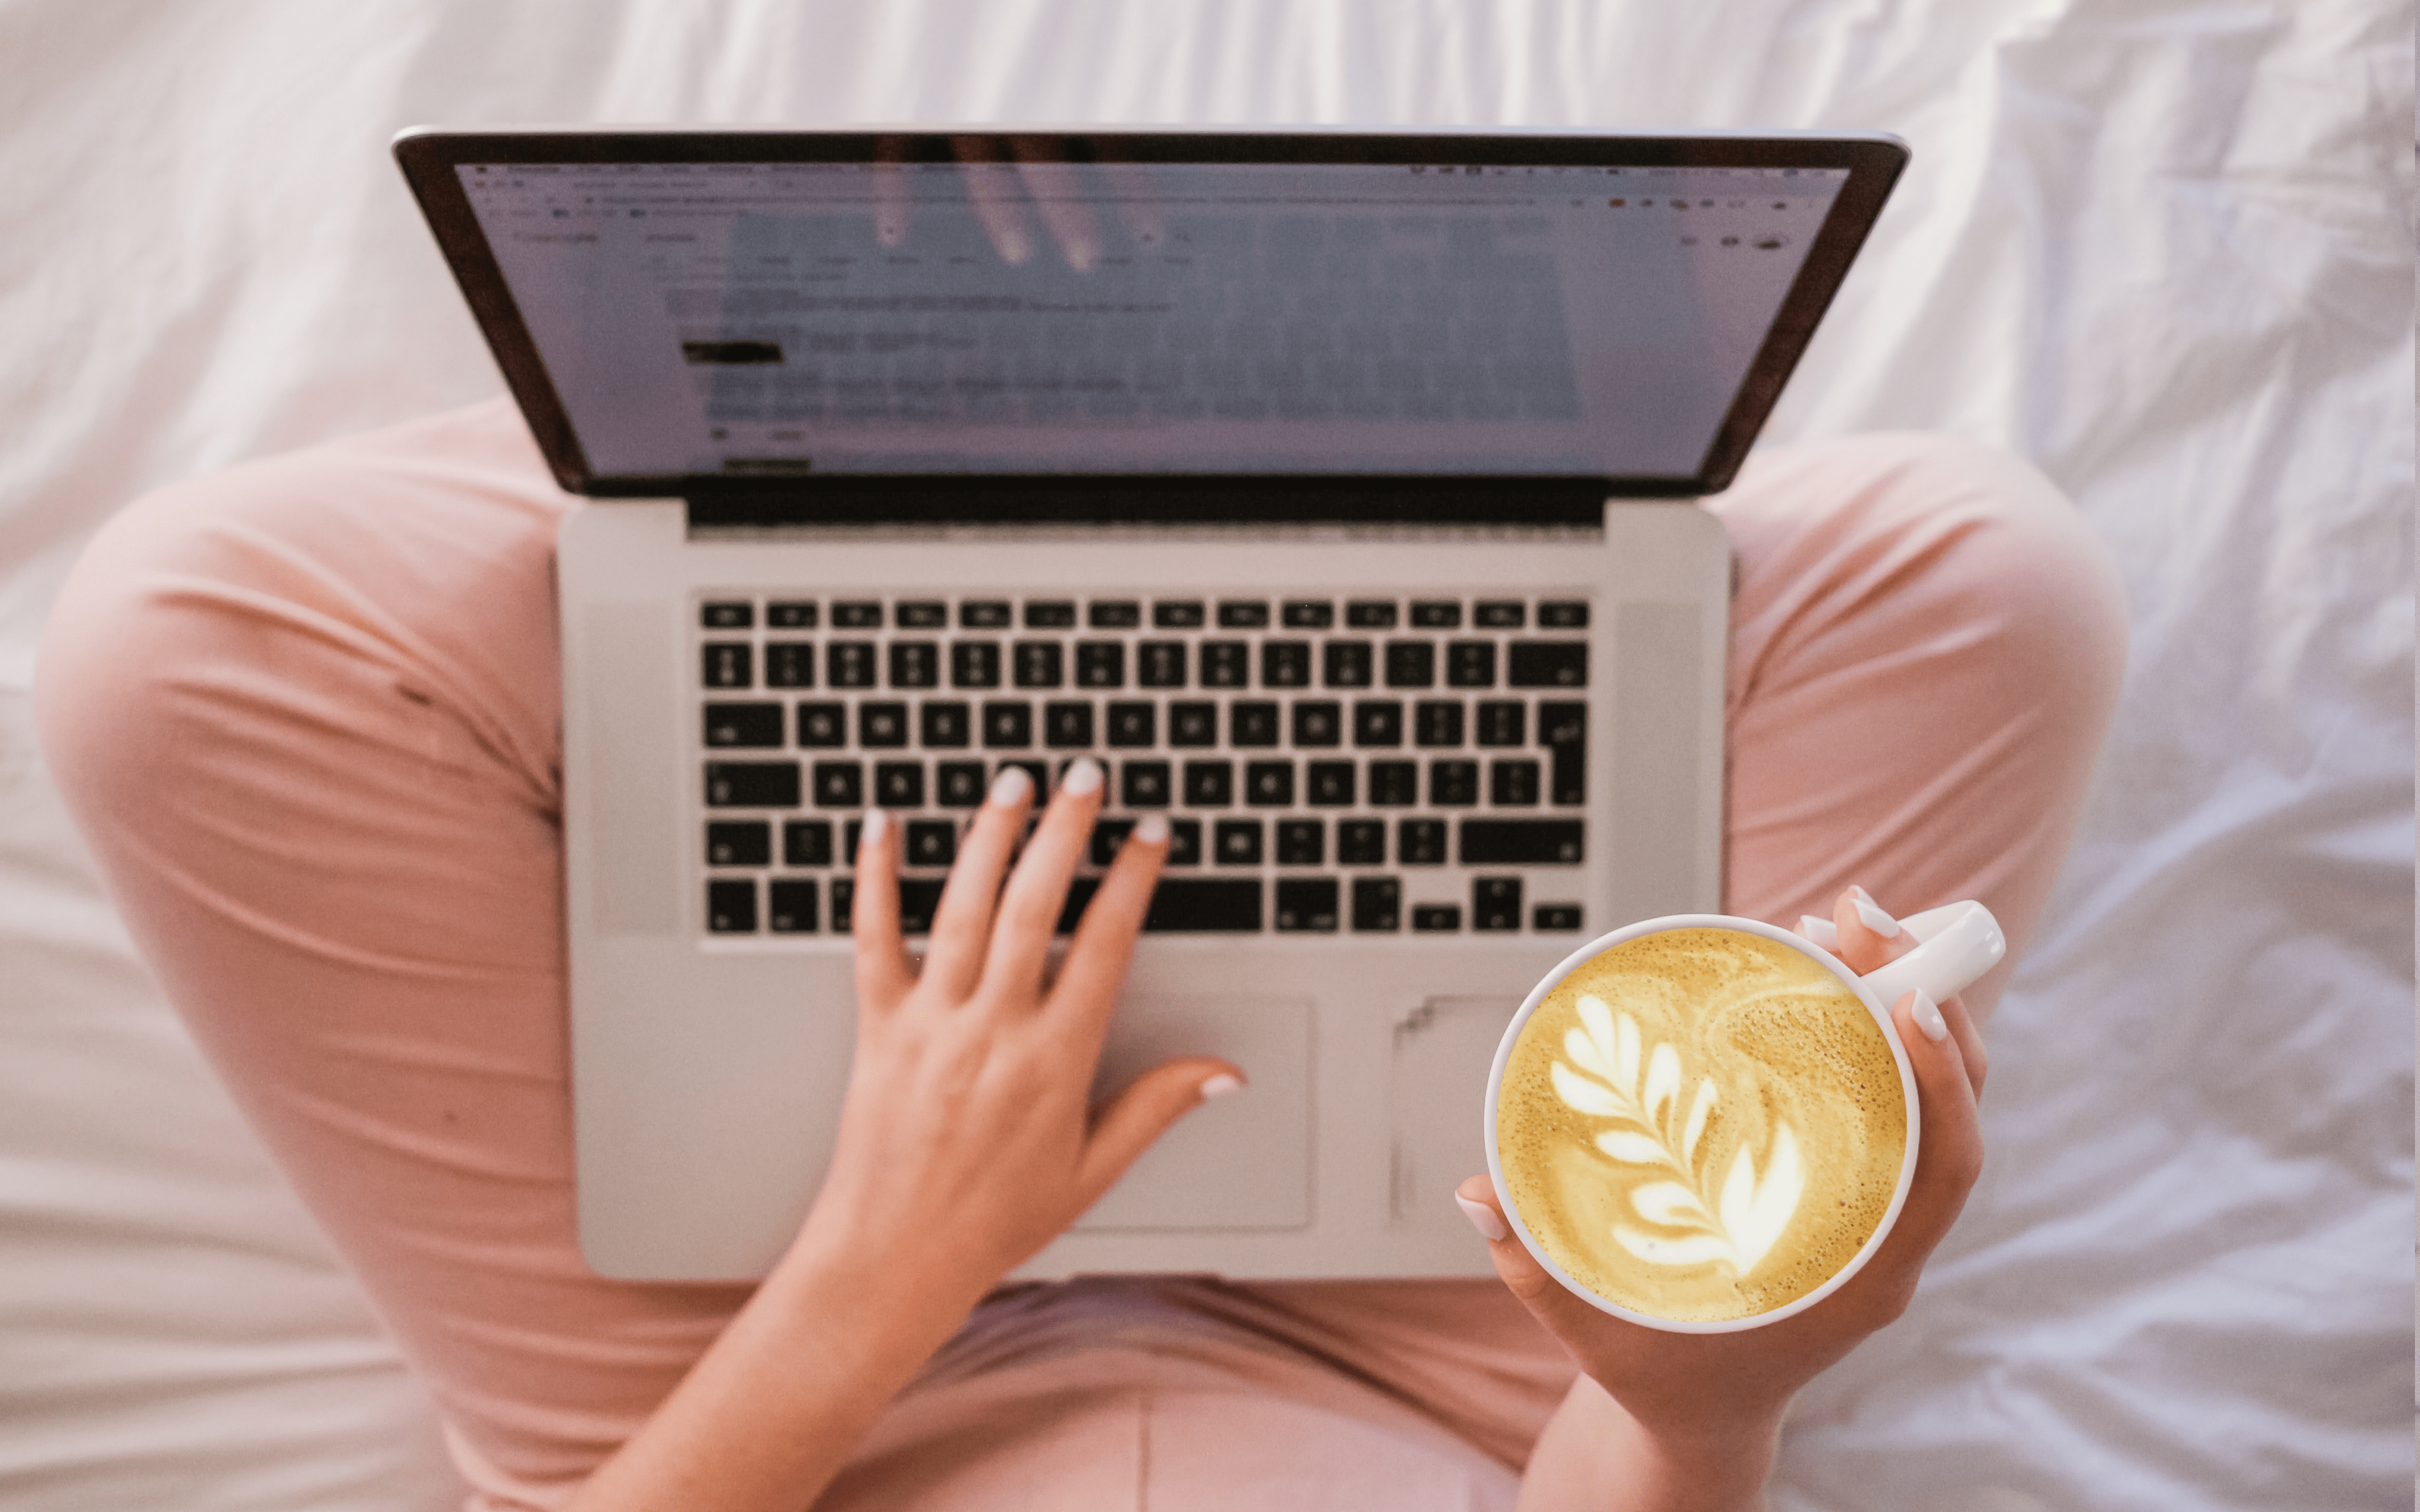 A woman with white painted fingernails sits on a duvet crossed legged. Her laptop is resting on her knees, while one hand types on her MacBook and the other holds a cup of Latte style coffee.